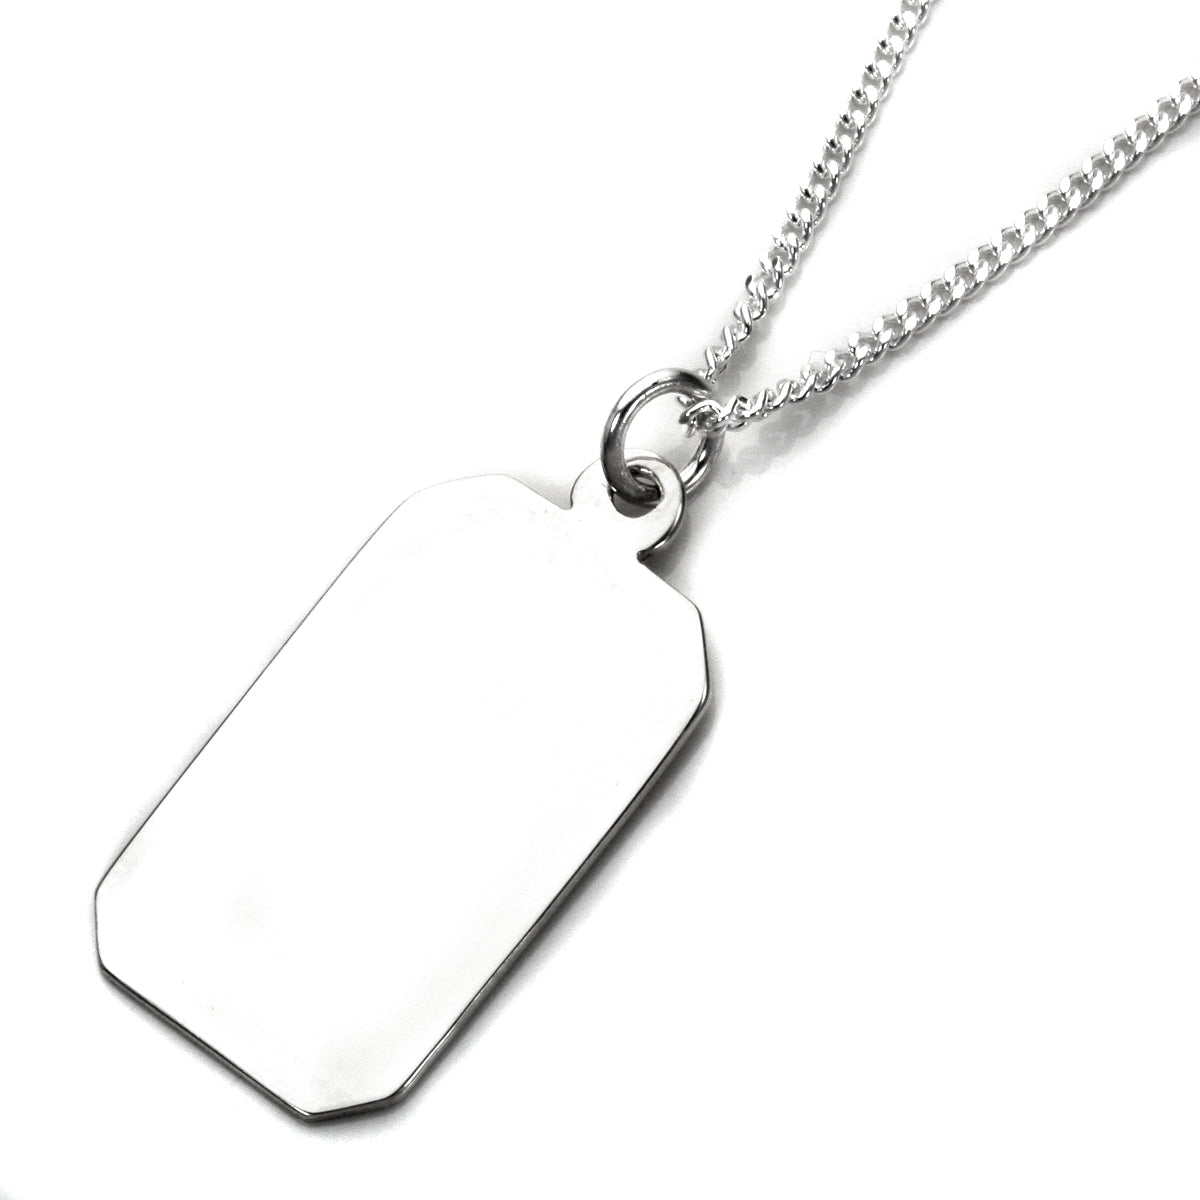 Sterling Silver Large Engravable Rectangular Pendant Necklace 16 - 24 Inches